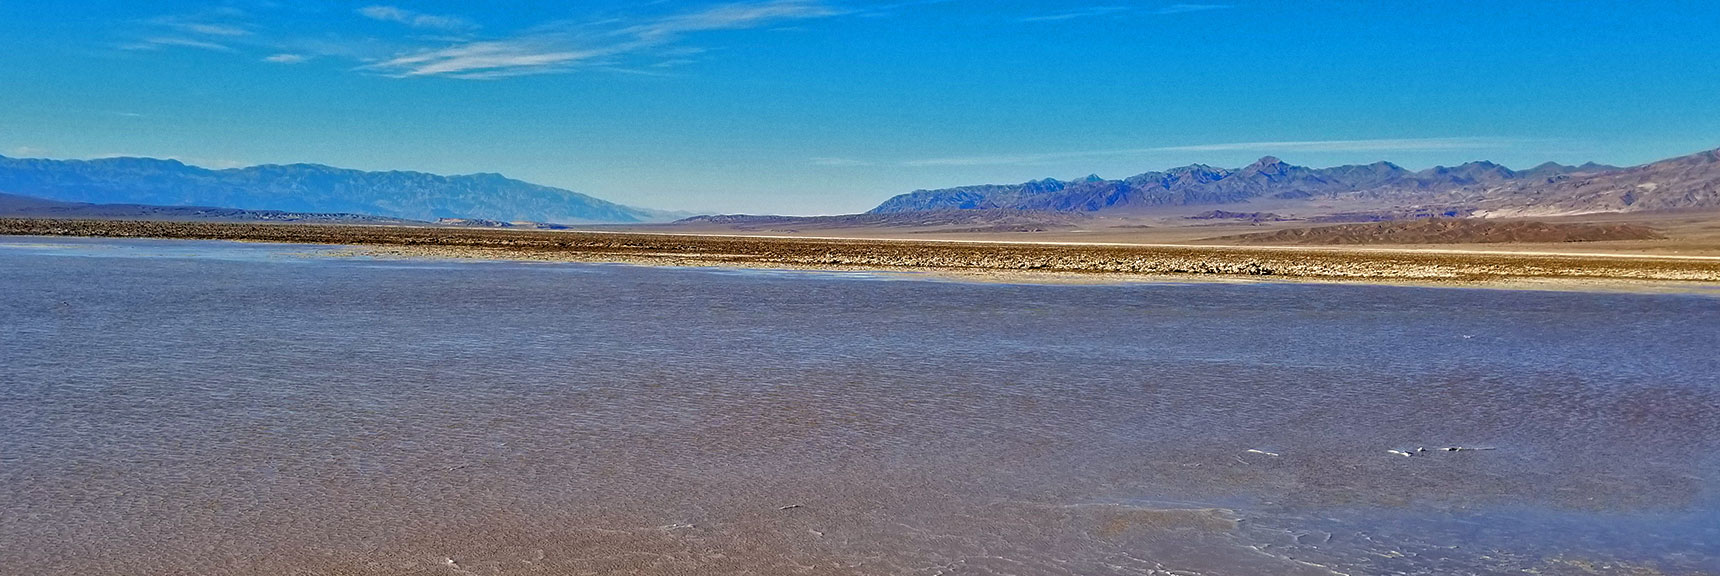 Return of Lake Manly (Lake in Death Valley) | Death Valley National Park, California